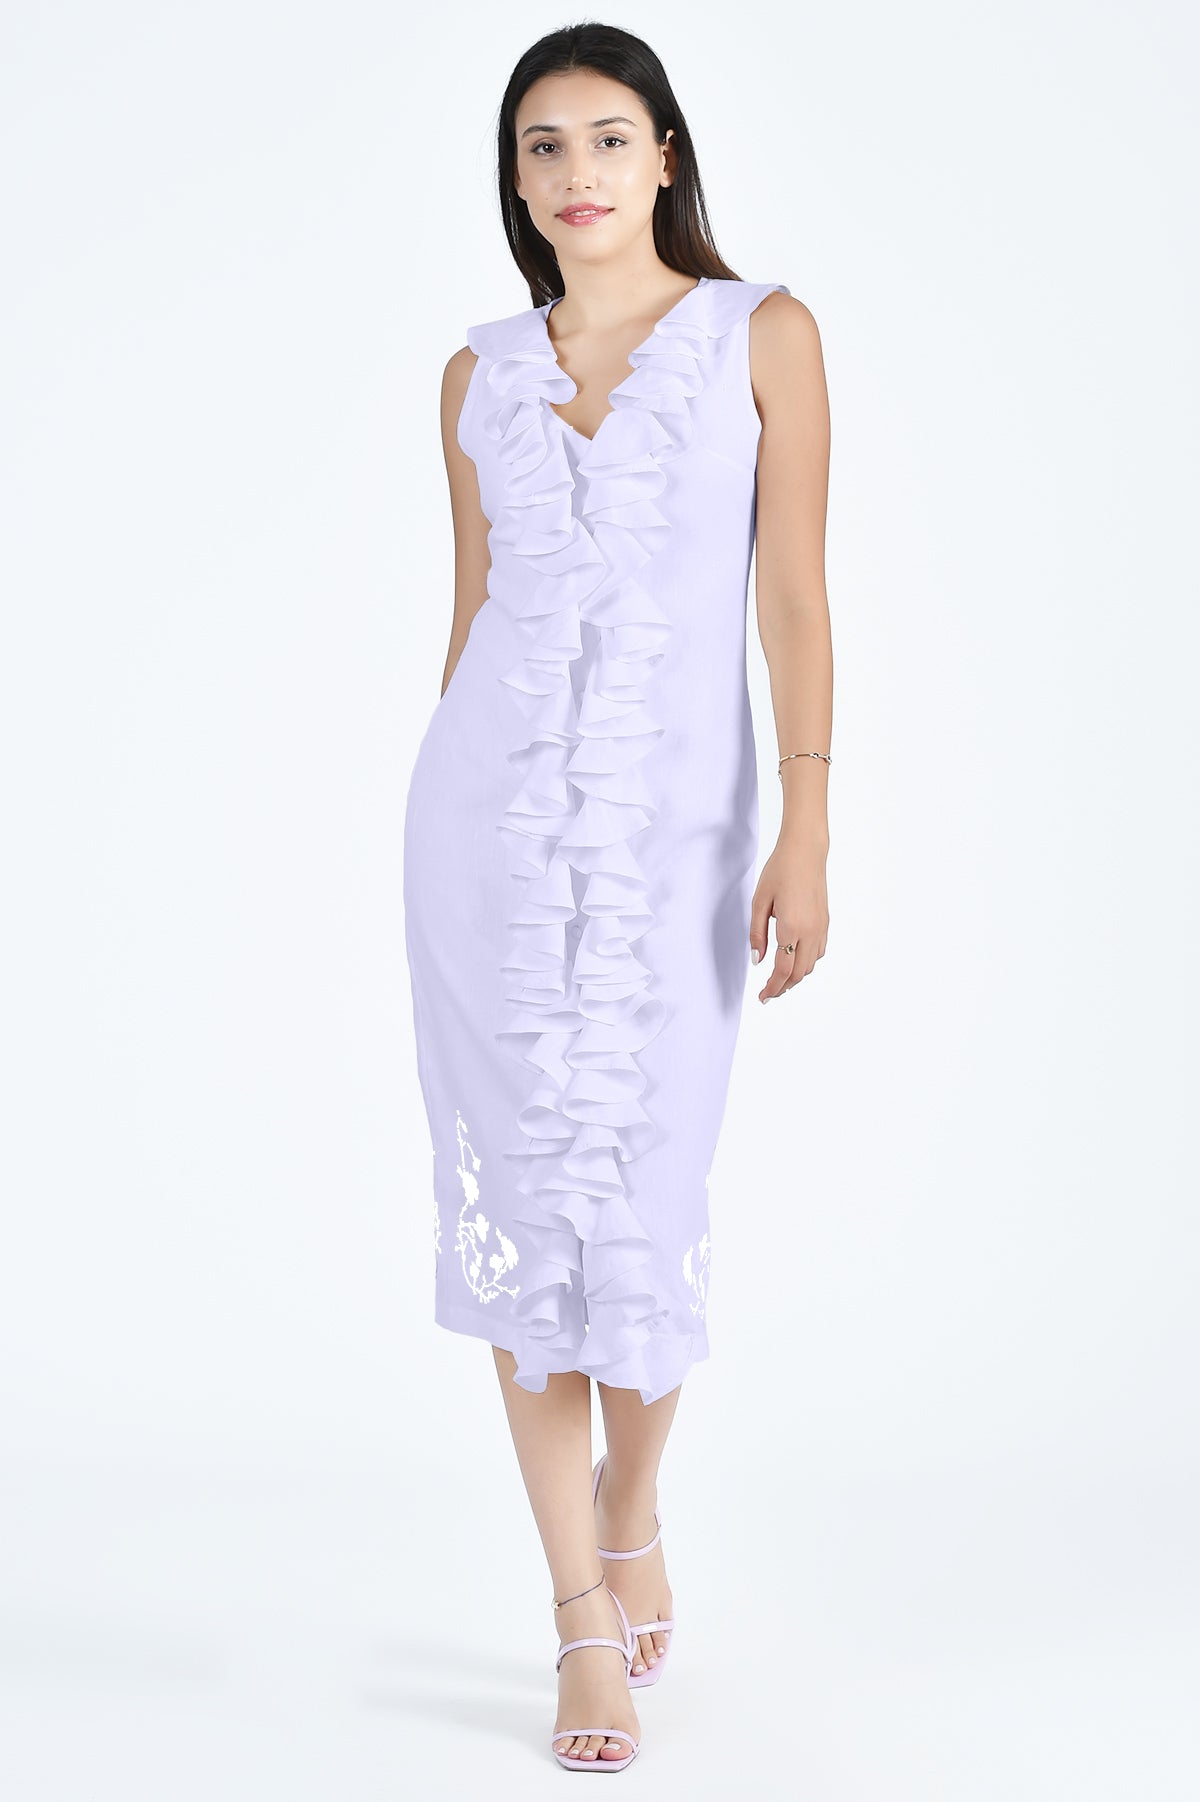 Belinda Sleeveless Ruffle Dress In Lilac By Fanm Mon (Wombman Collection)